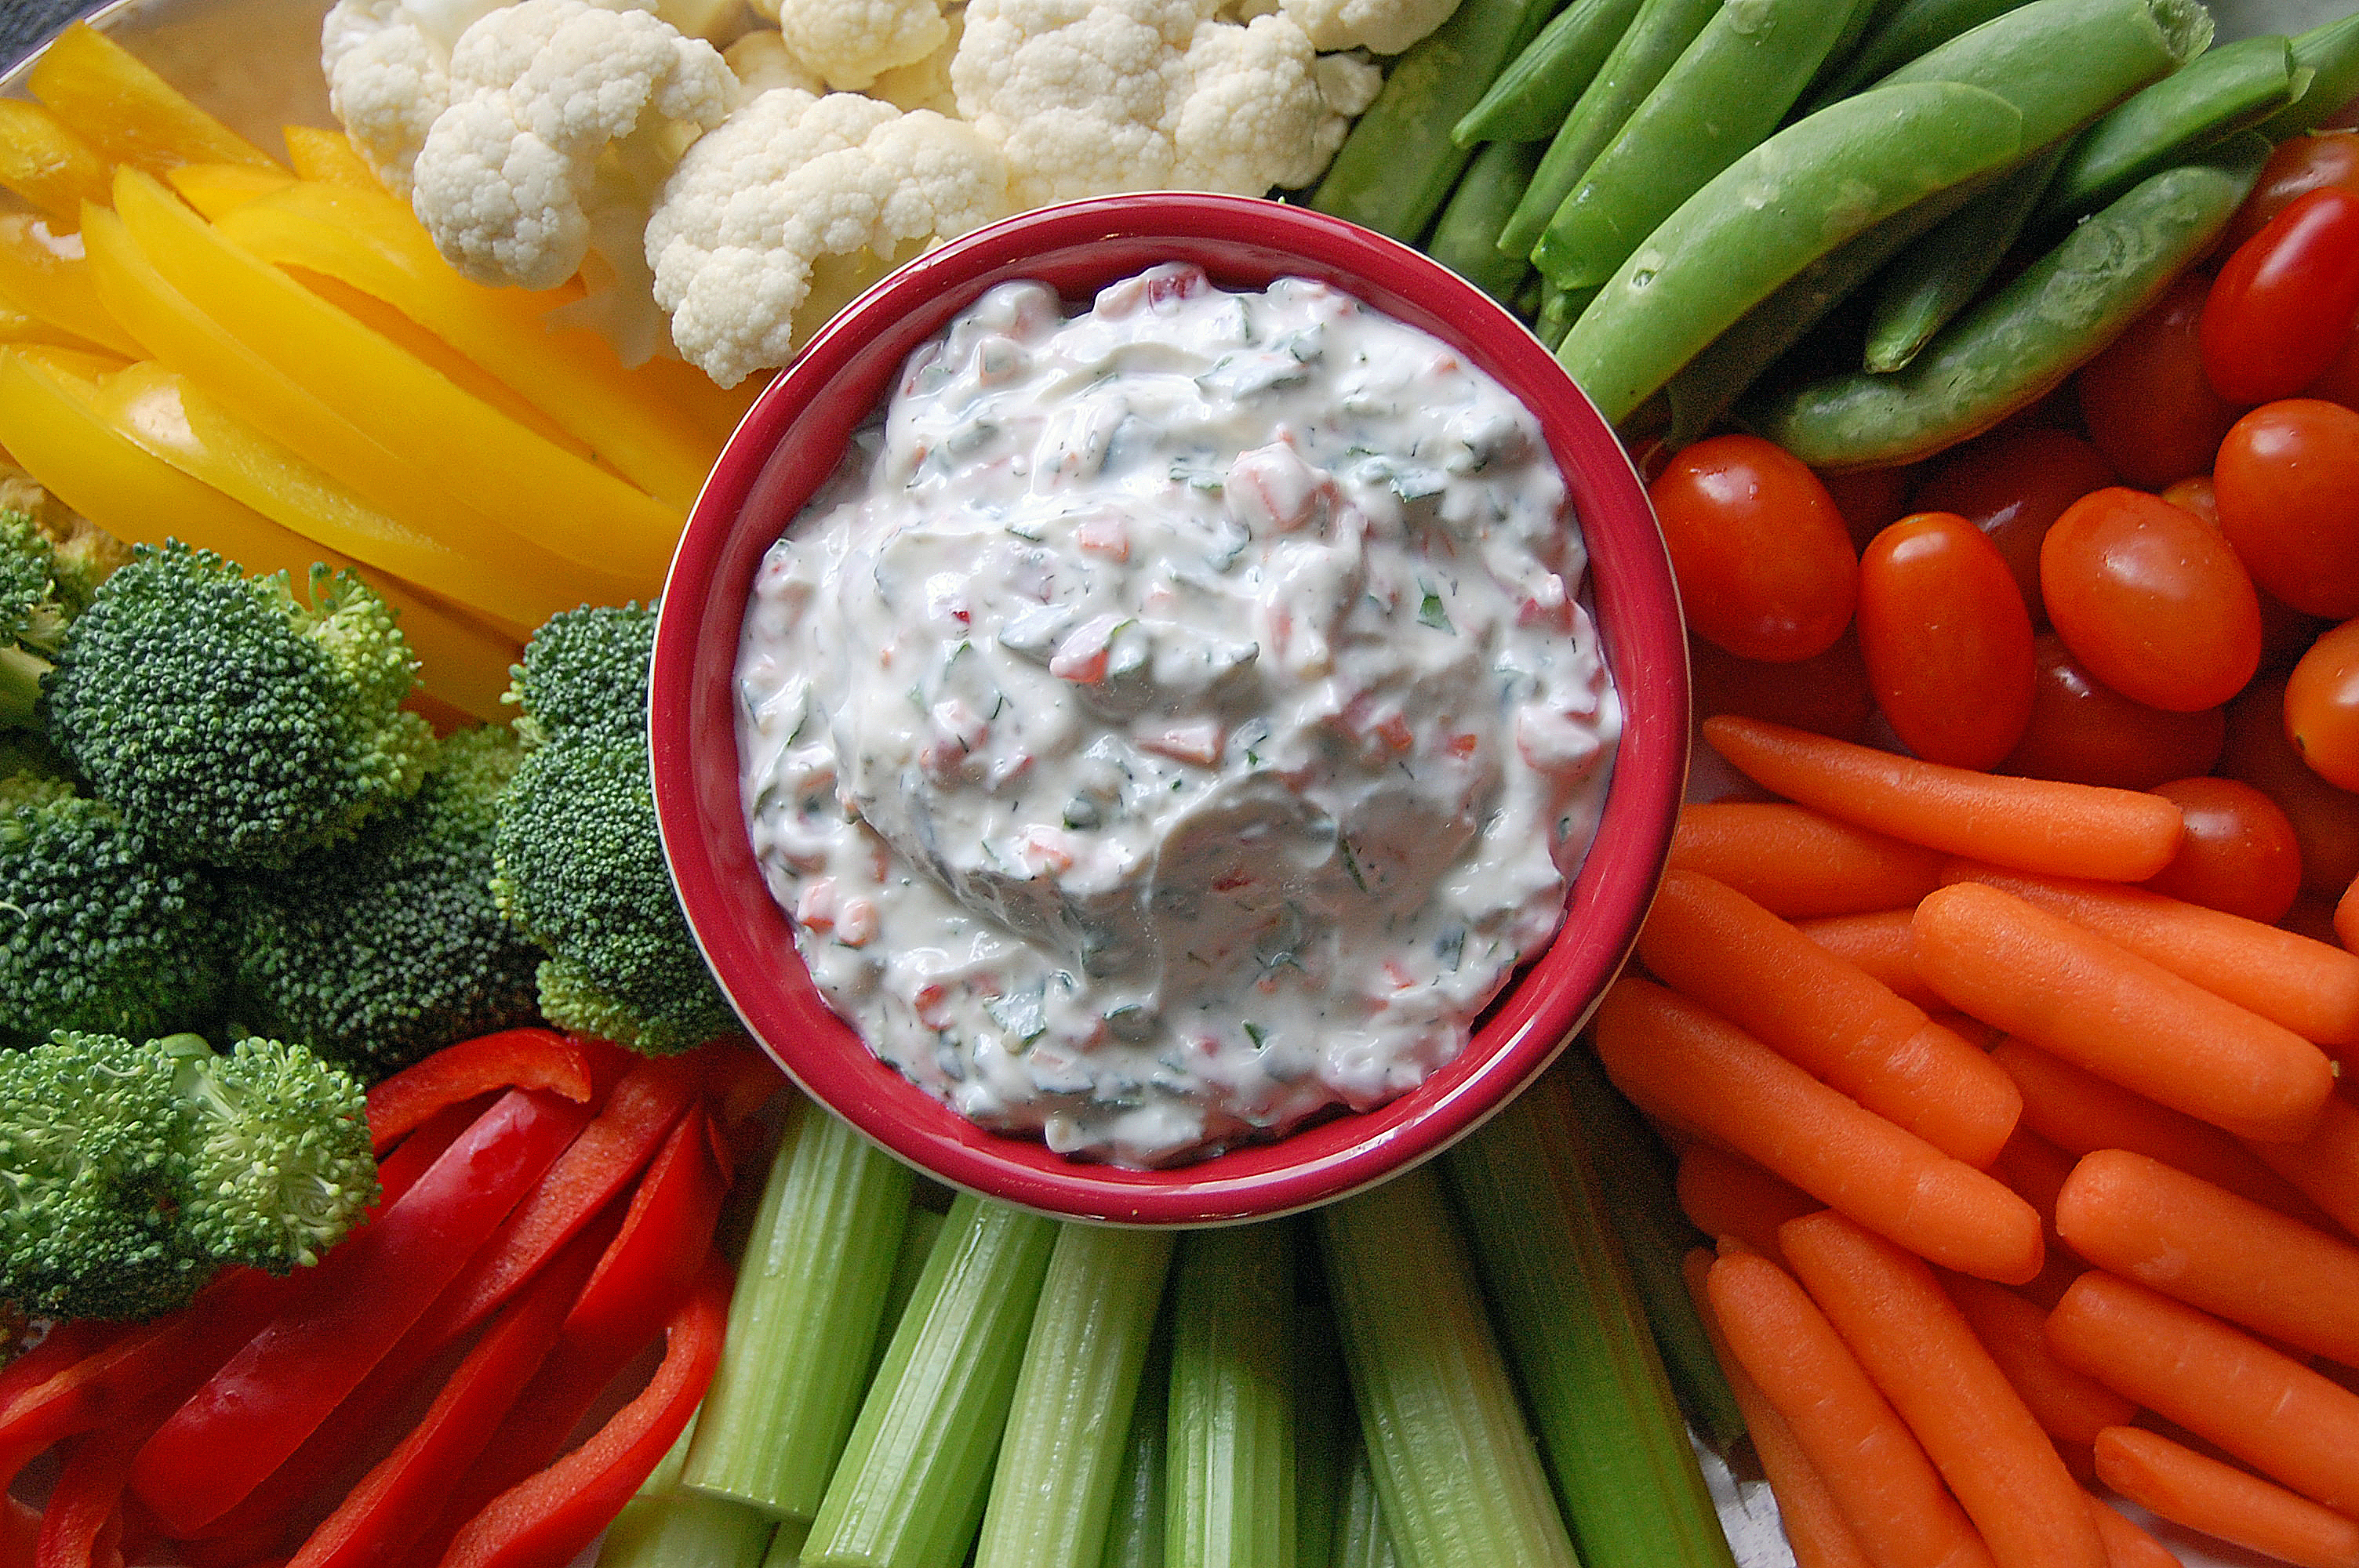 This spinach dip makes use of some of summer’s bounty, the super-nutritious green veggies spinach and kale, along with carrots and bell peppers. (NDSU photo)